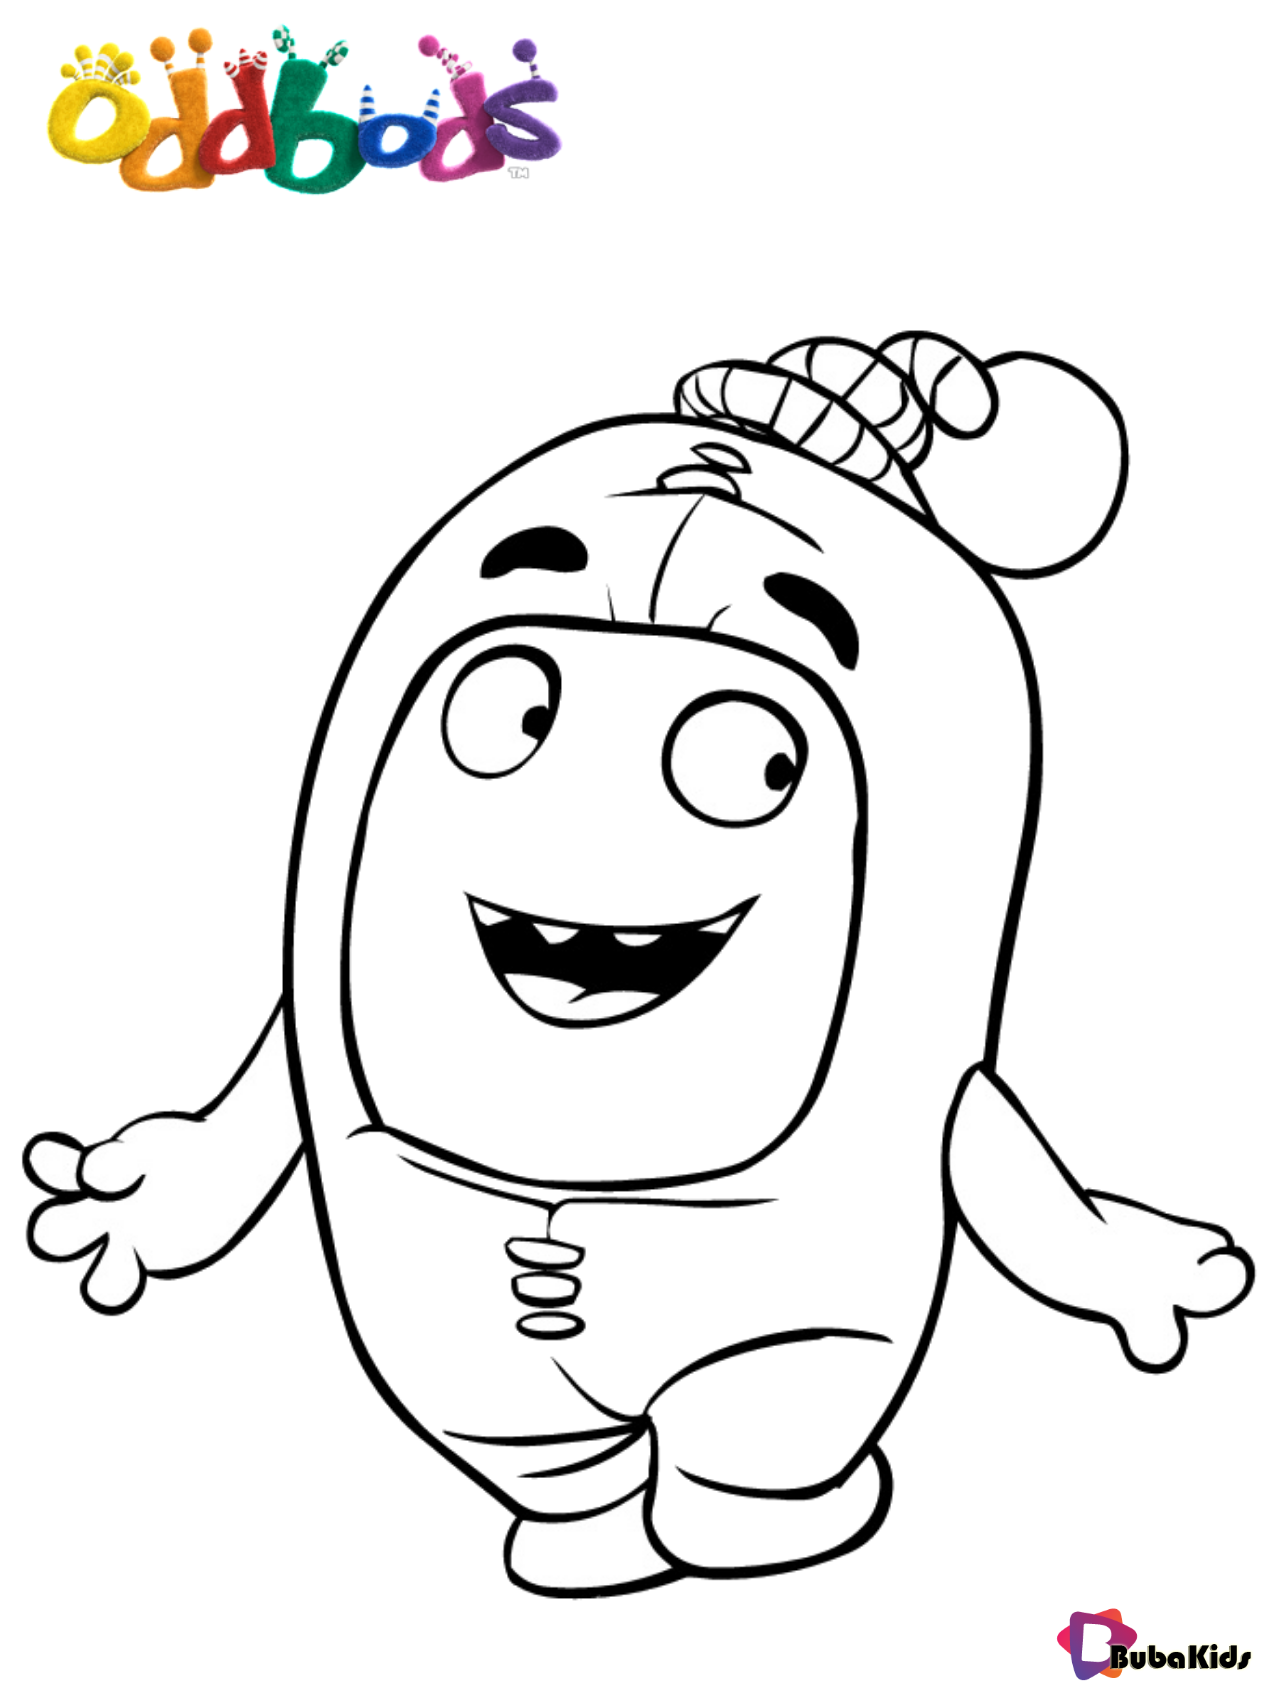 Oddbods newt free and printable coloring pages in 2020 | Printable coloring  pages, Cartoon coloring pages, Coloring pages